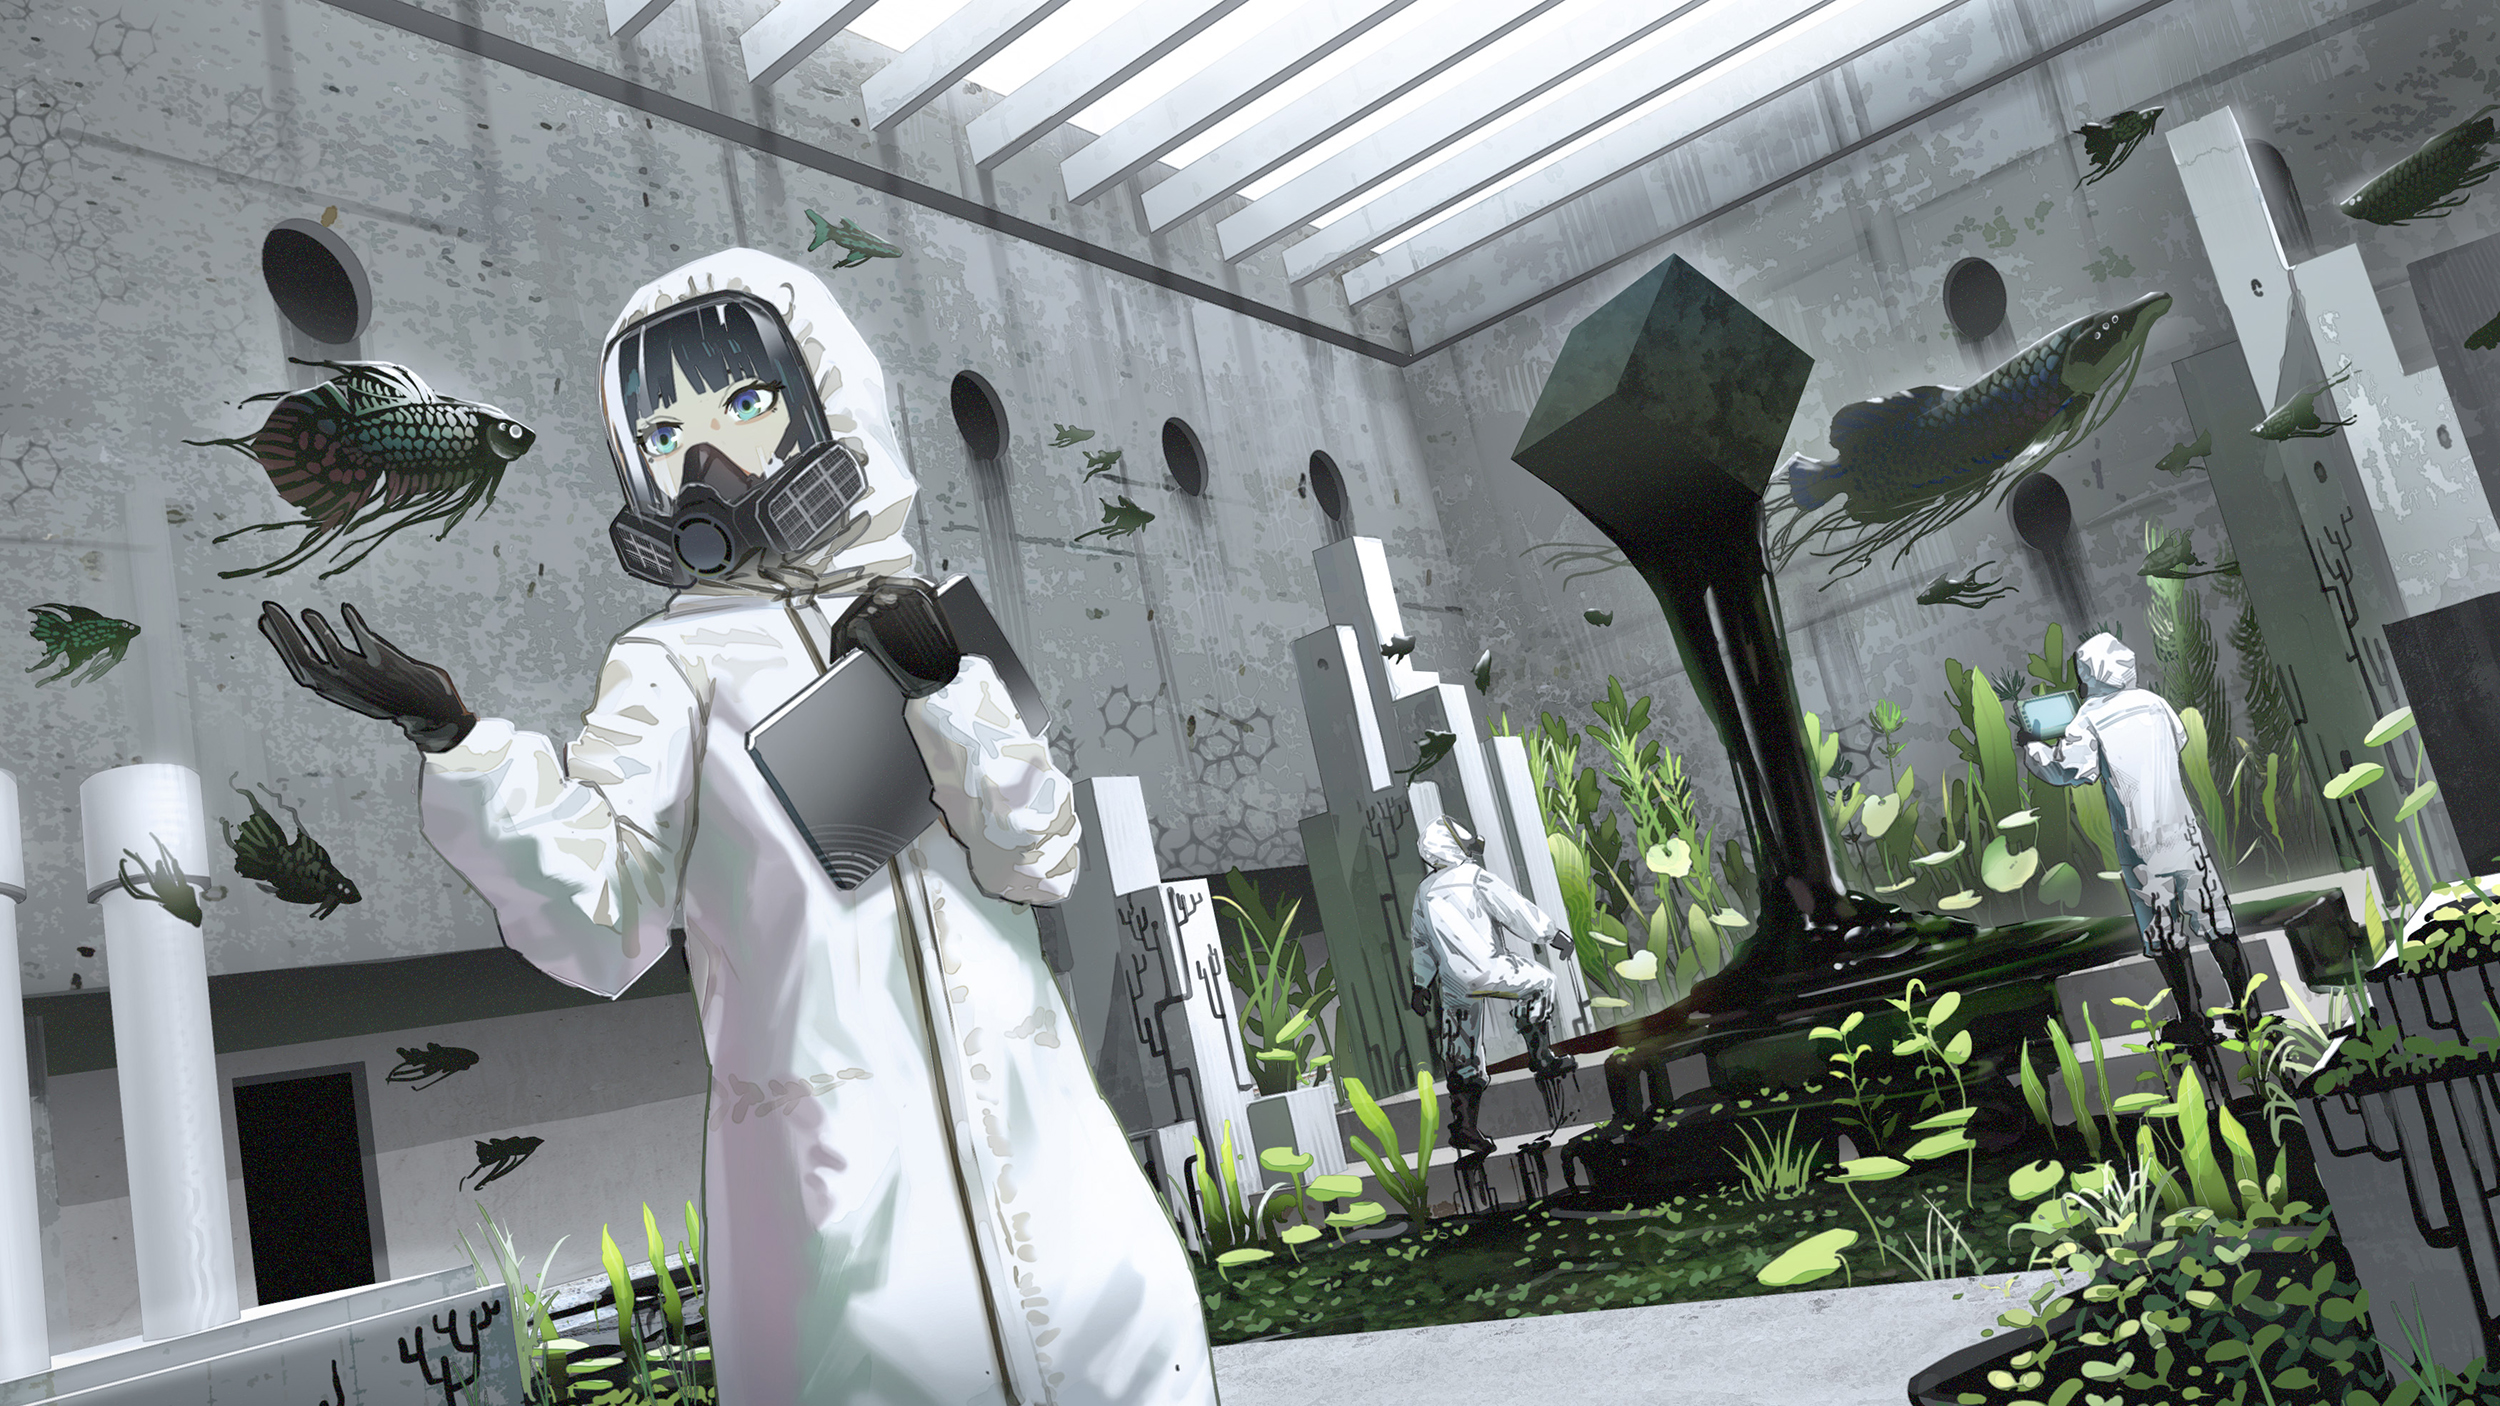 Anime 2500x1406 fish fantasy architecture anime girls protective suit black hair tablet  anime looking away arms reaching standing hirokima animals cube plants leaves gas masks blue eyes hazmat suits gloves black gloves scenery